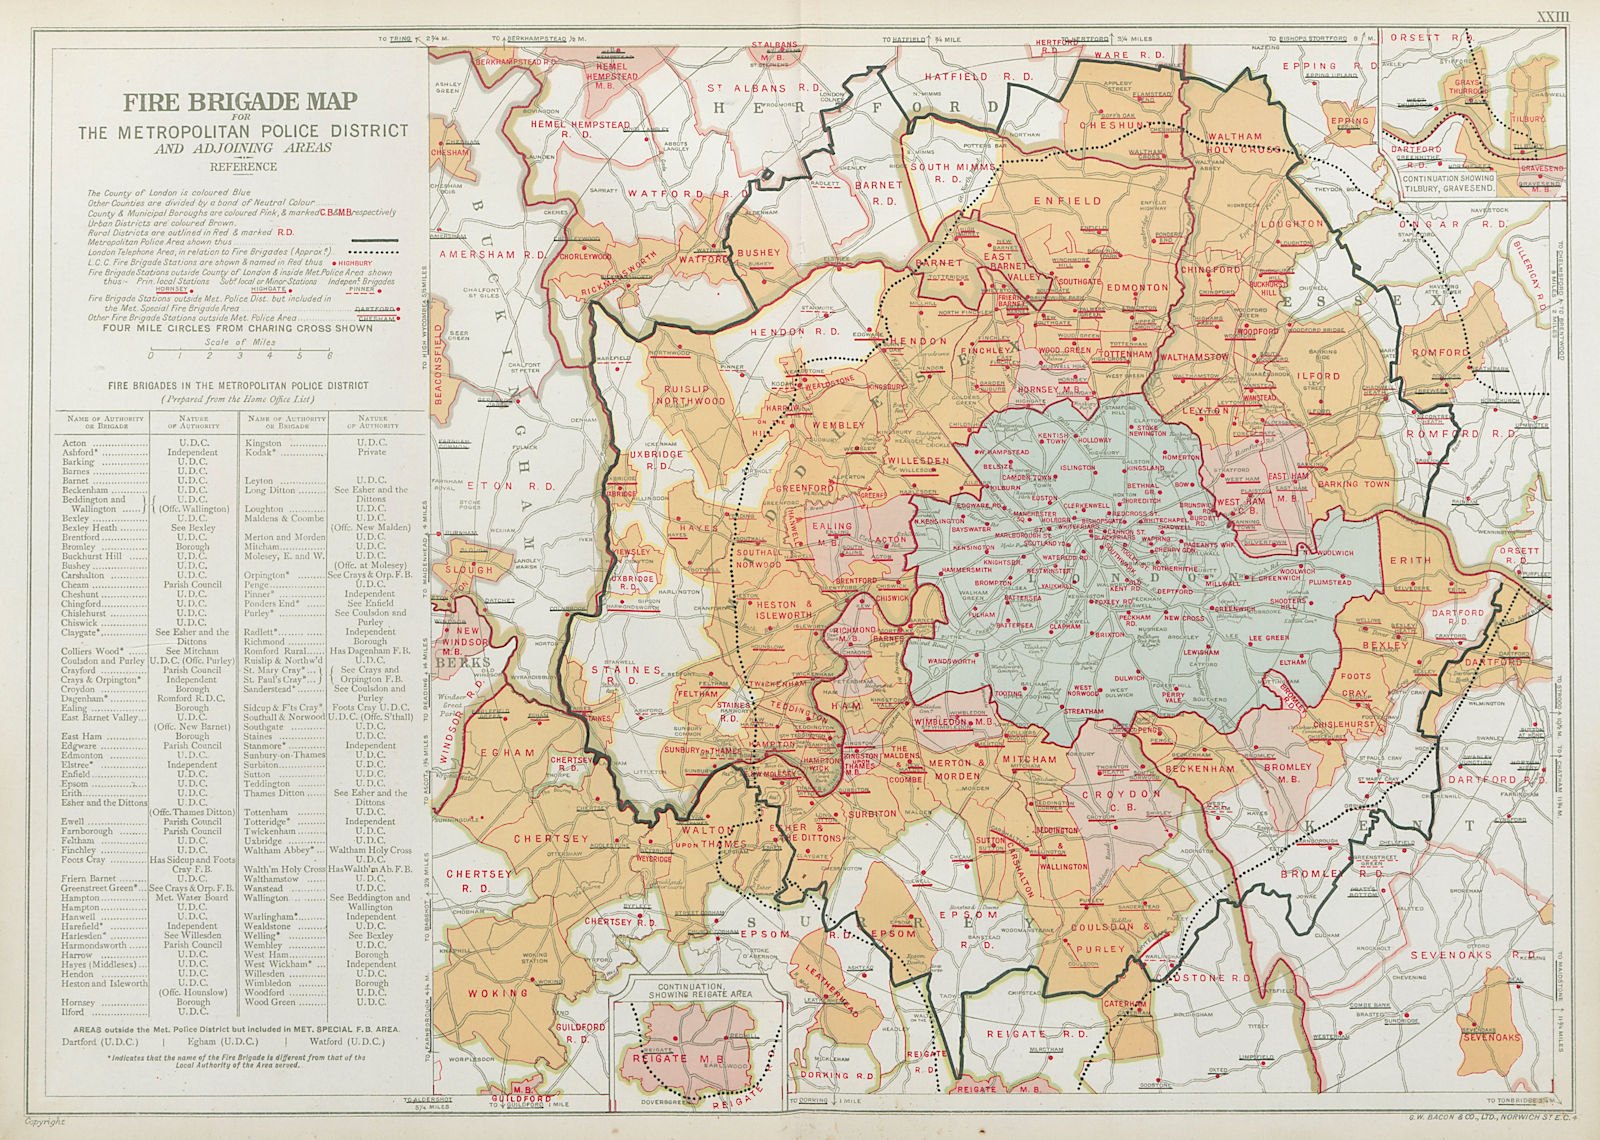 Associate Product LONDON FIRE BRIGADE. Showing Fire Brigade Stations. Vintage map. BACON 1920